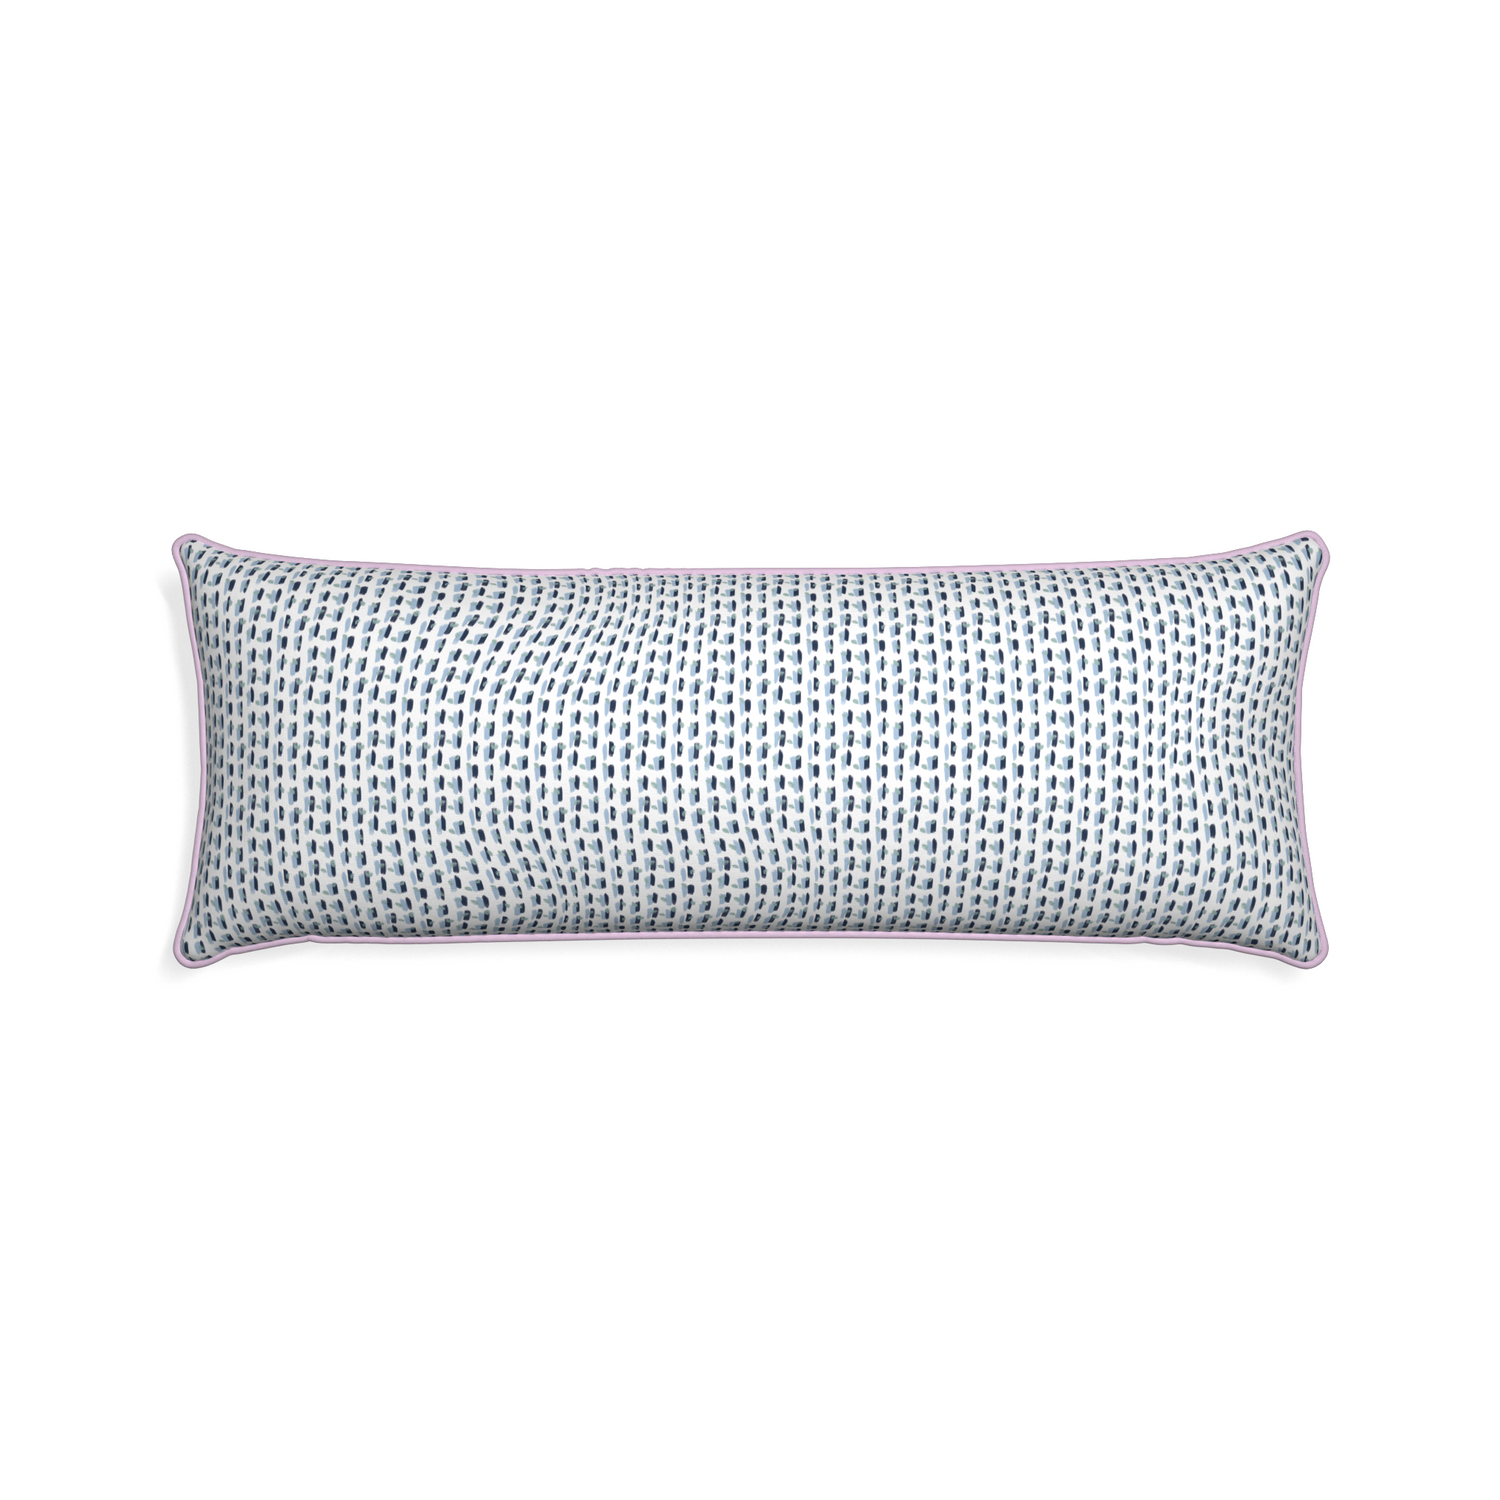 Xl-lumbar poppy blue custom pillow with l piping on white background